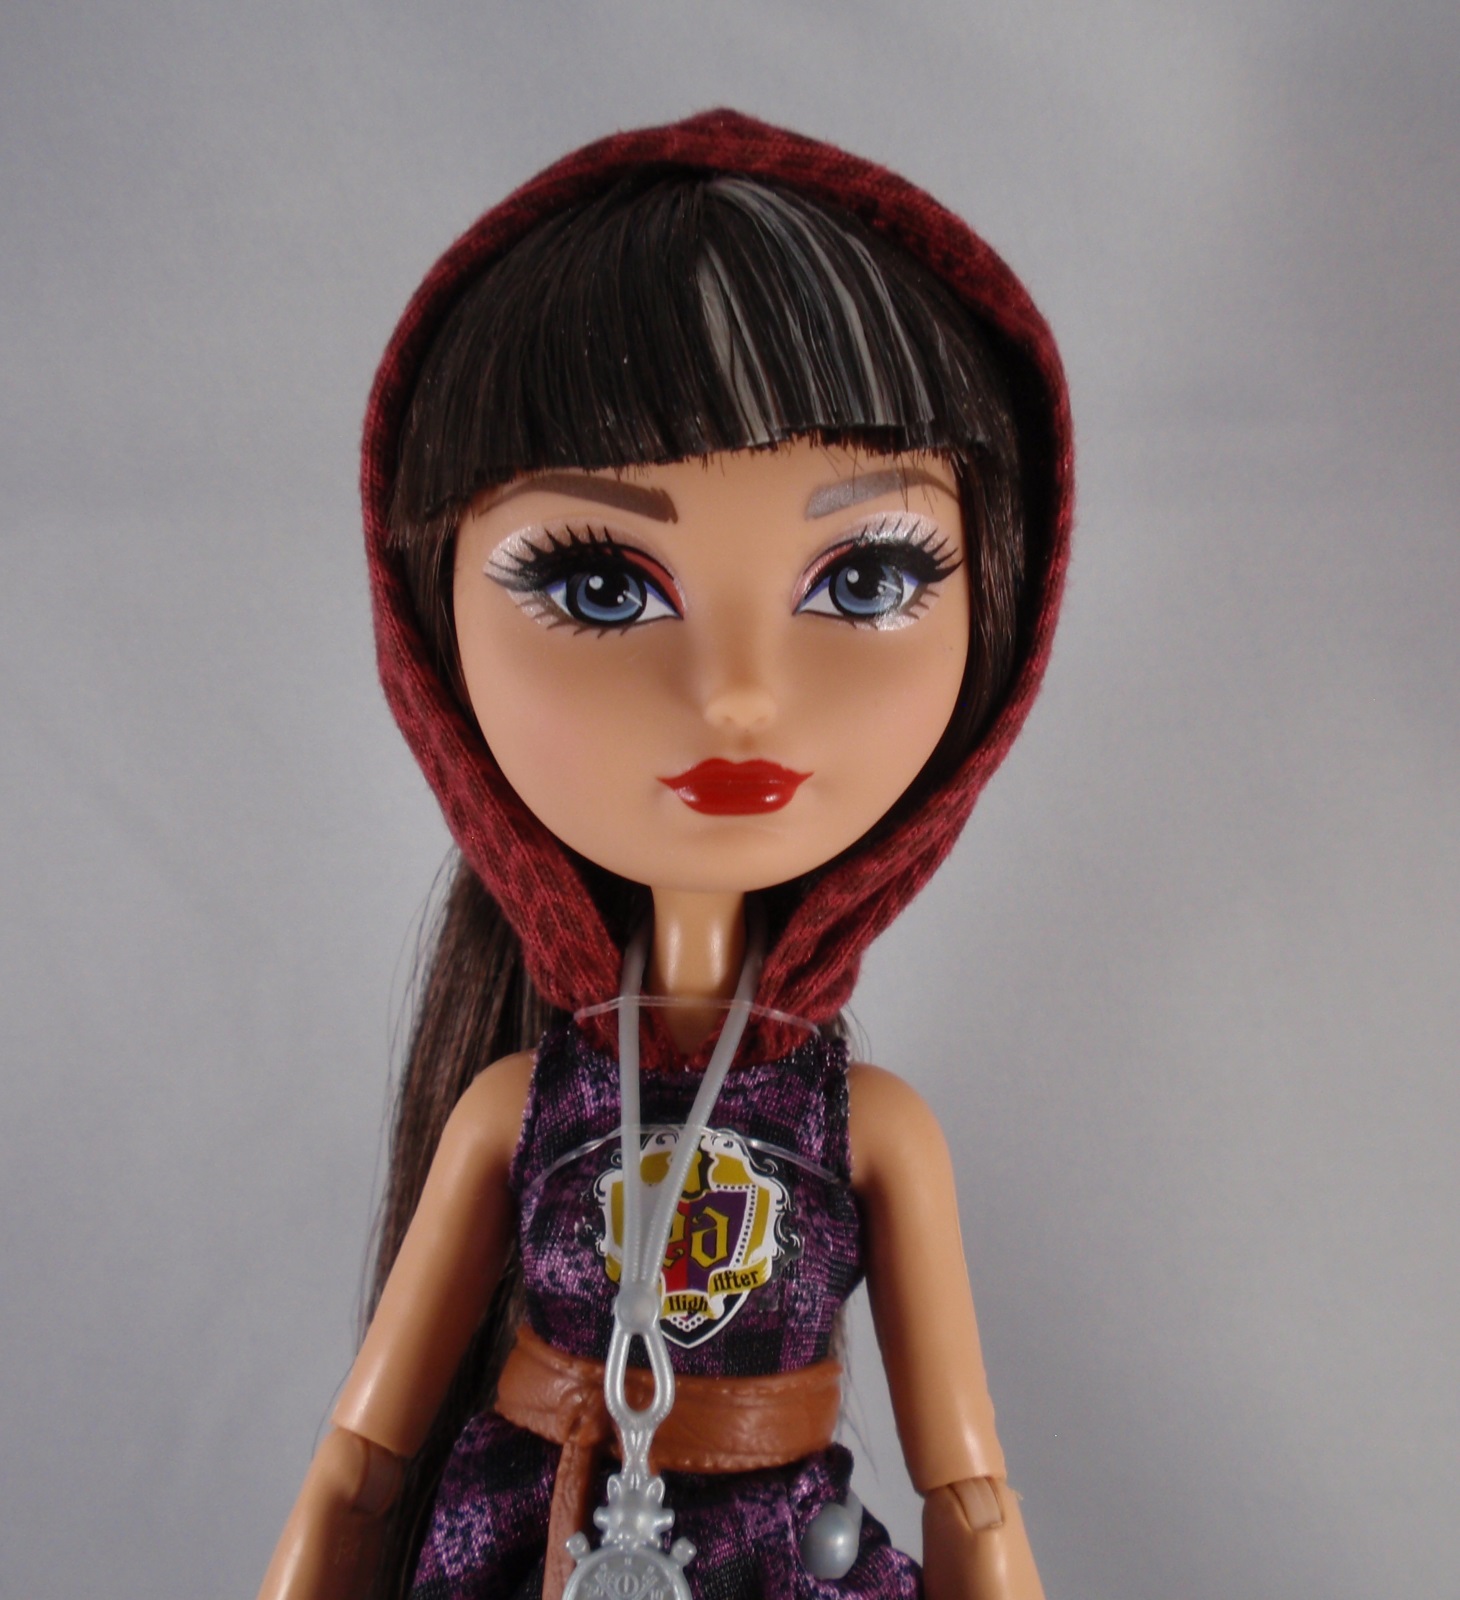 Ever After High Tri Castle On 3 Pack With Exclusive Hunter Huntsman, Cerise  Hood, and Lizzie Hearts Dolls